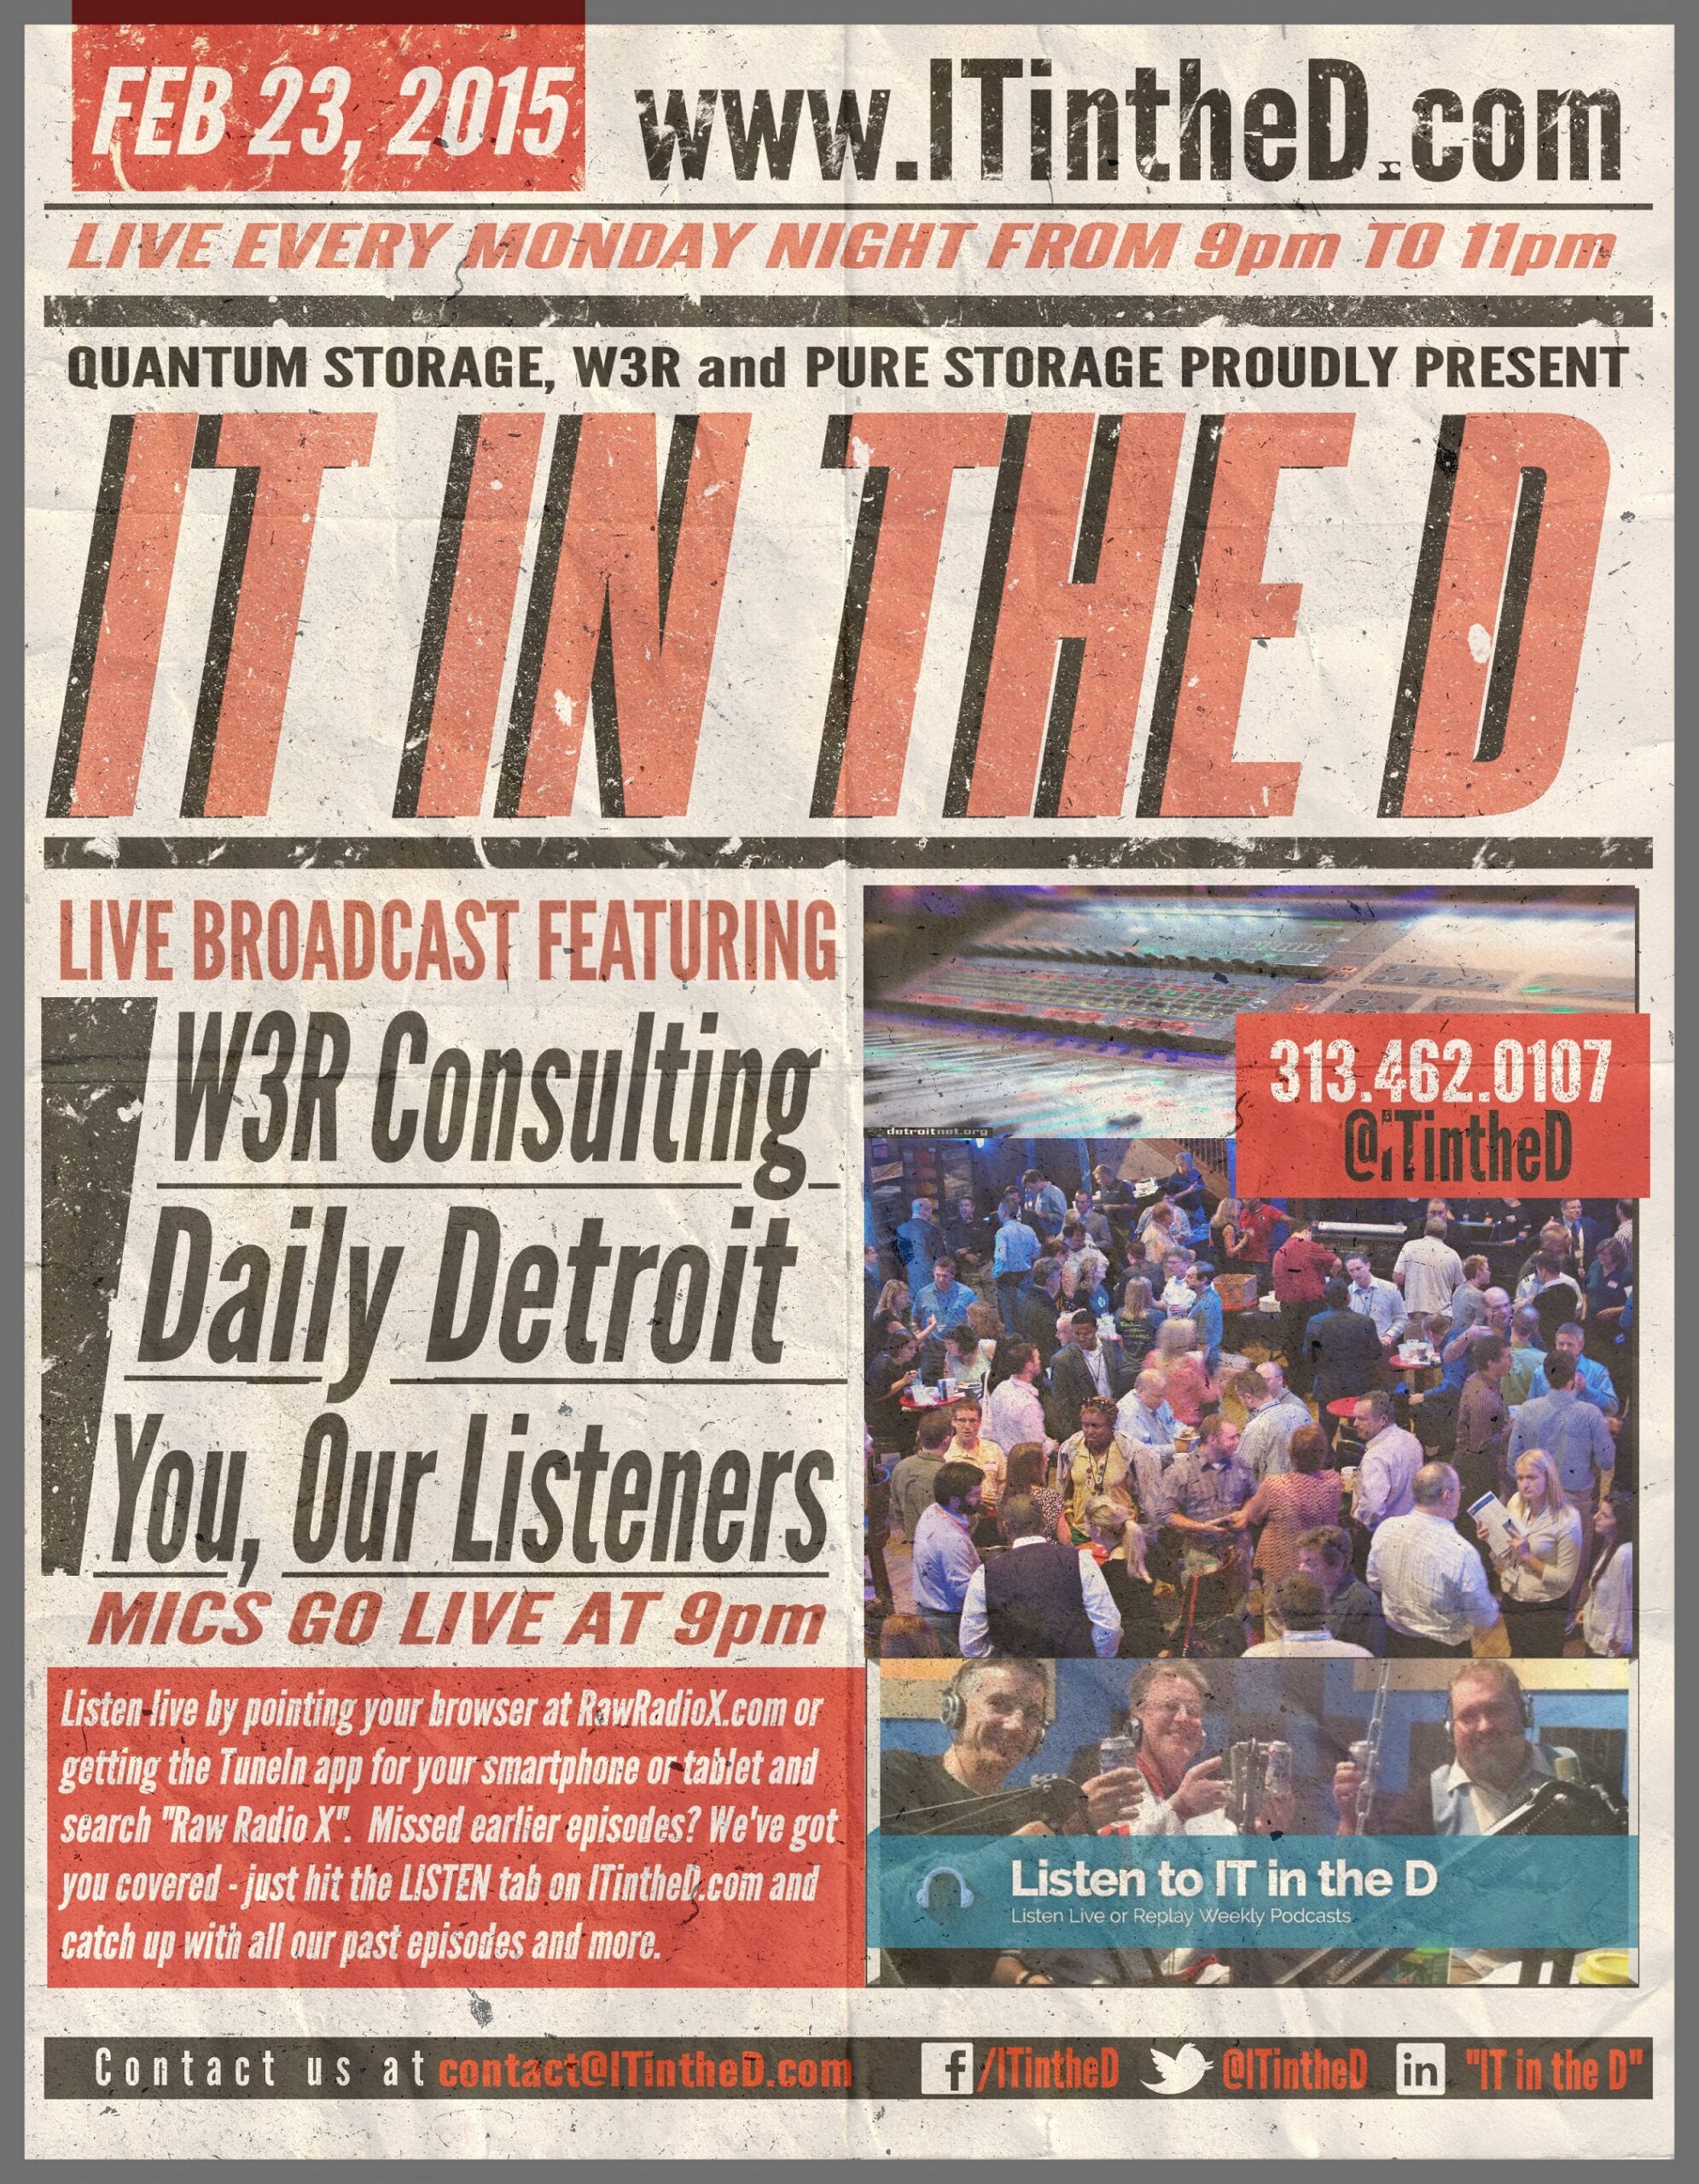 W3R and Daily Detroit Live In-Studio Tonight, Event Updates and More for 2/23/2015